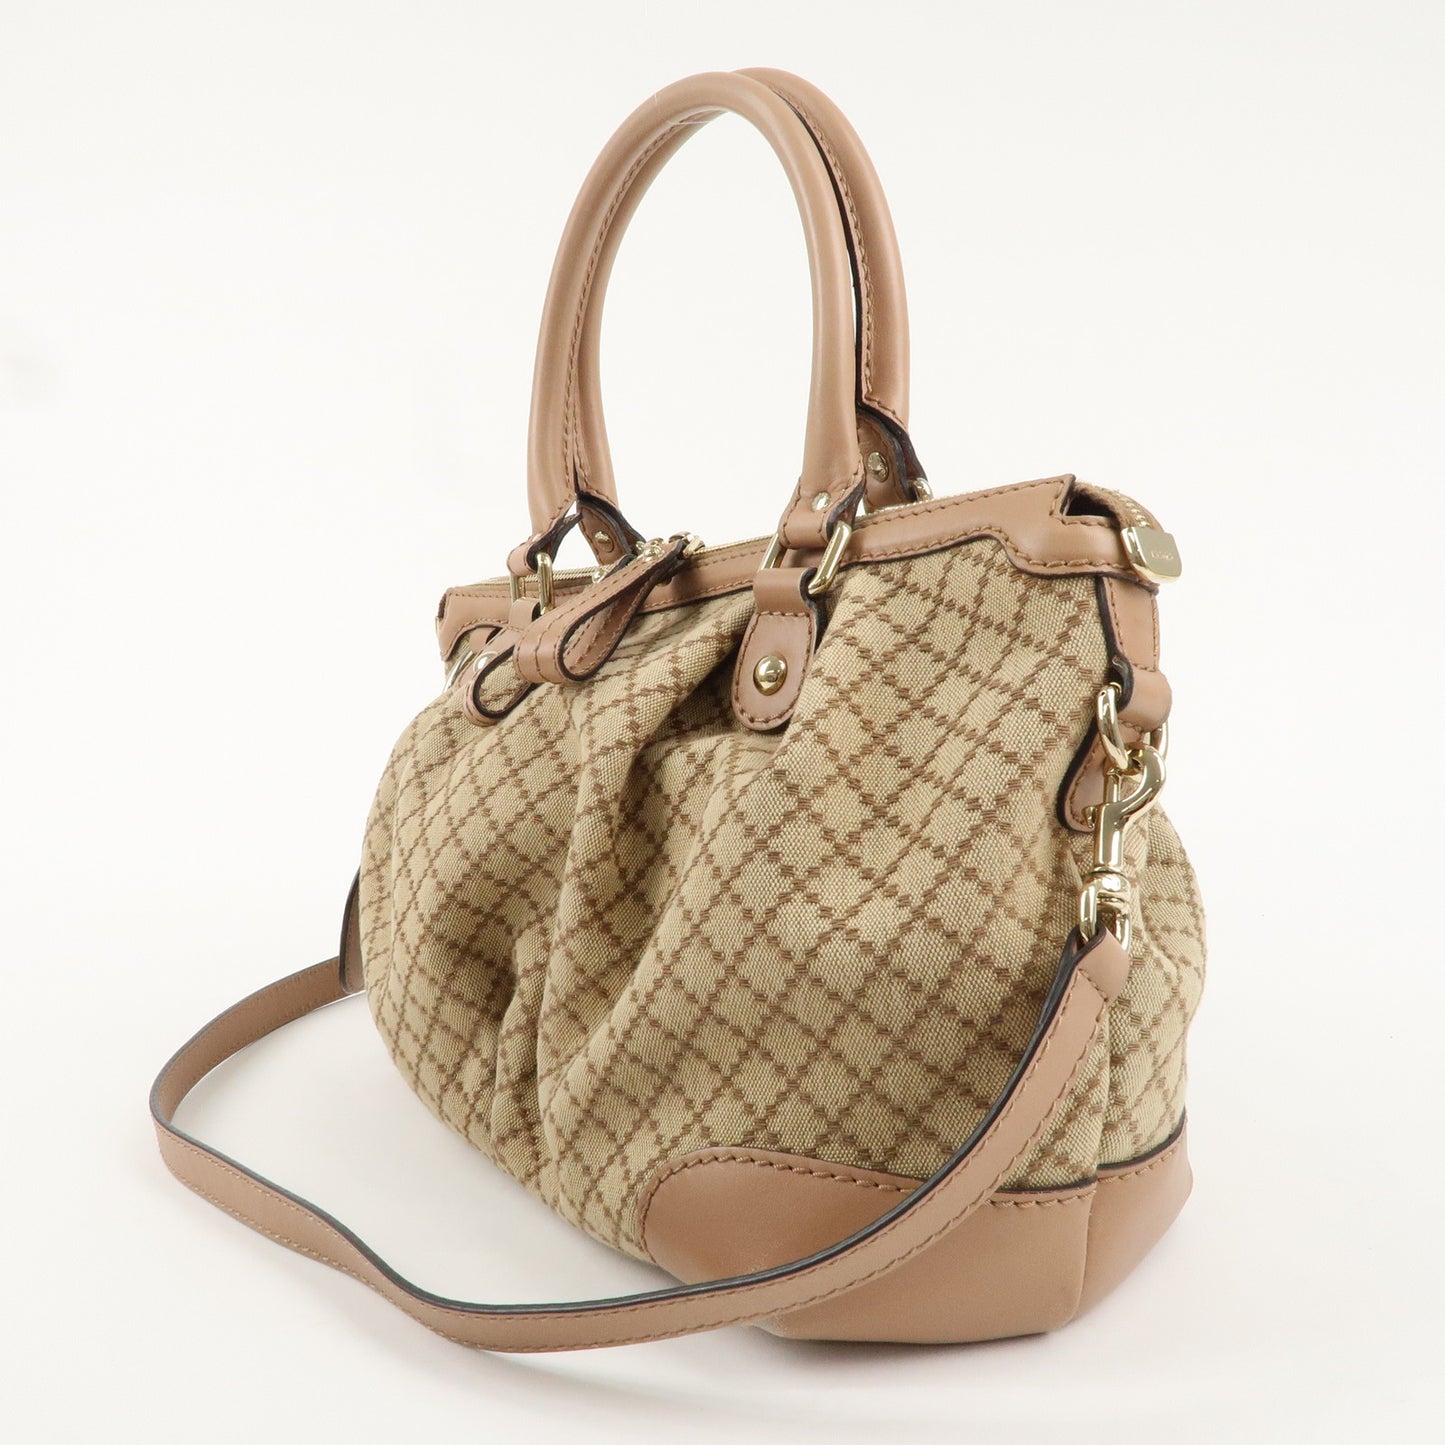 GUCCI Diamante Canvas Leather 2way Bag Hand Bag Pink Beige 247902